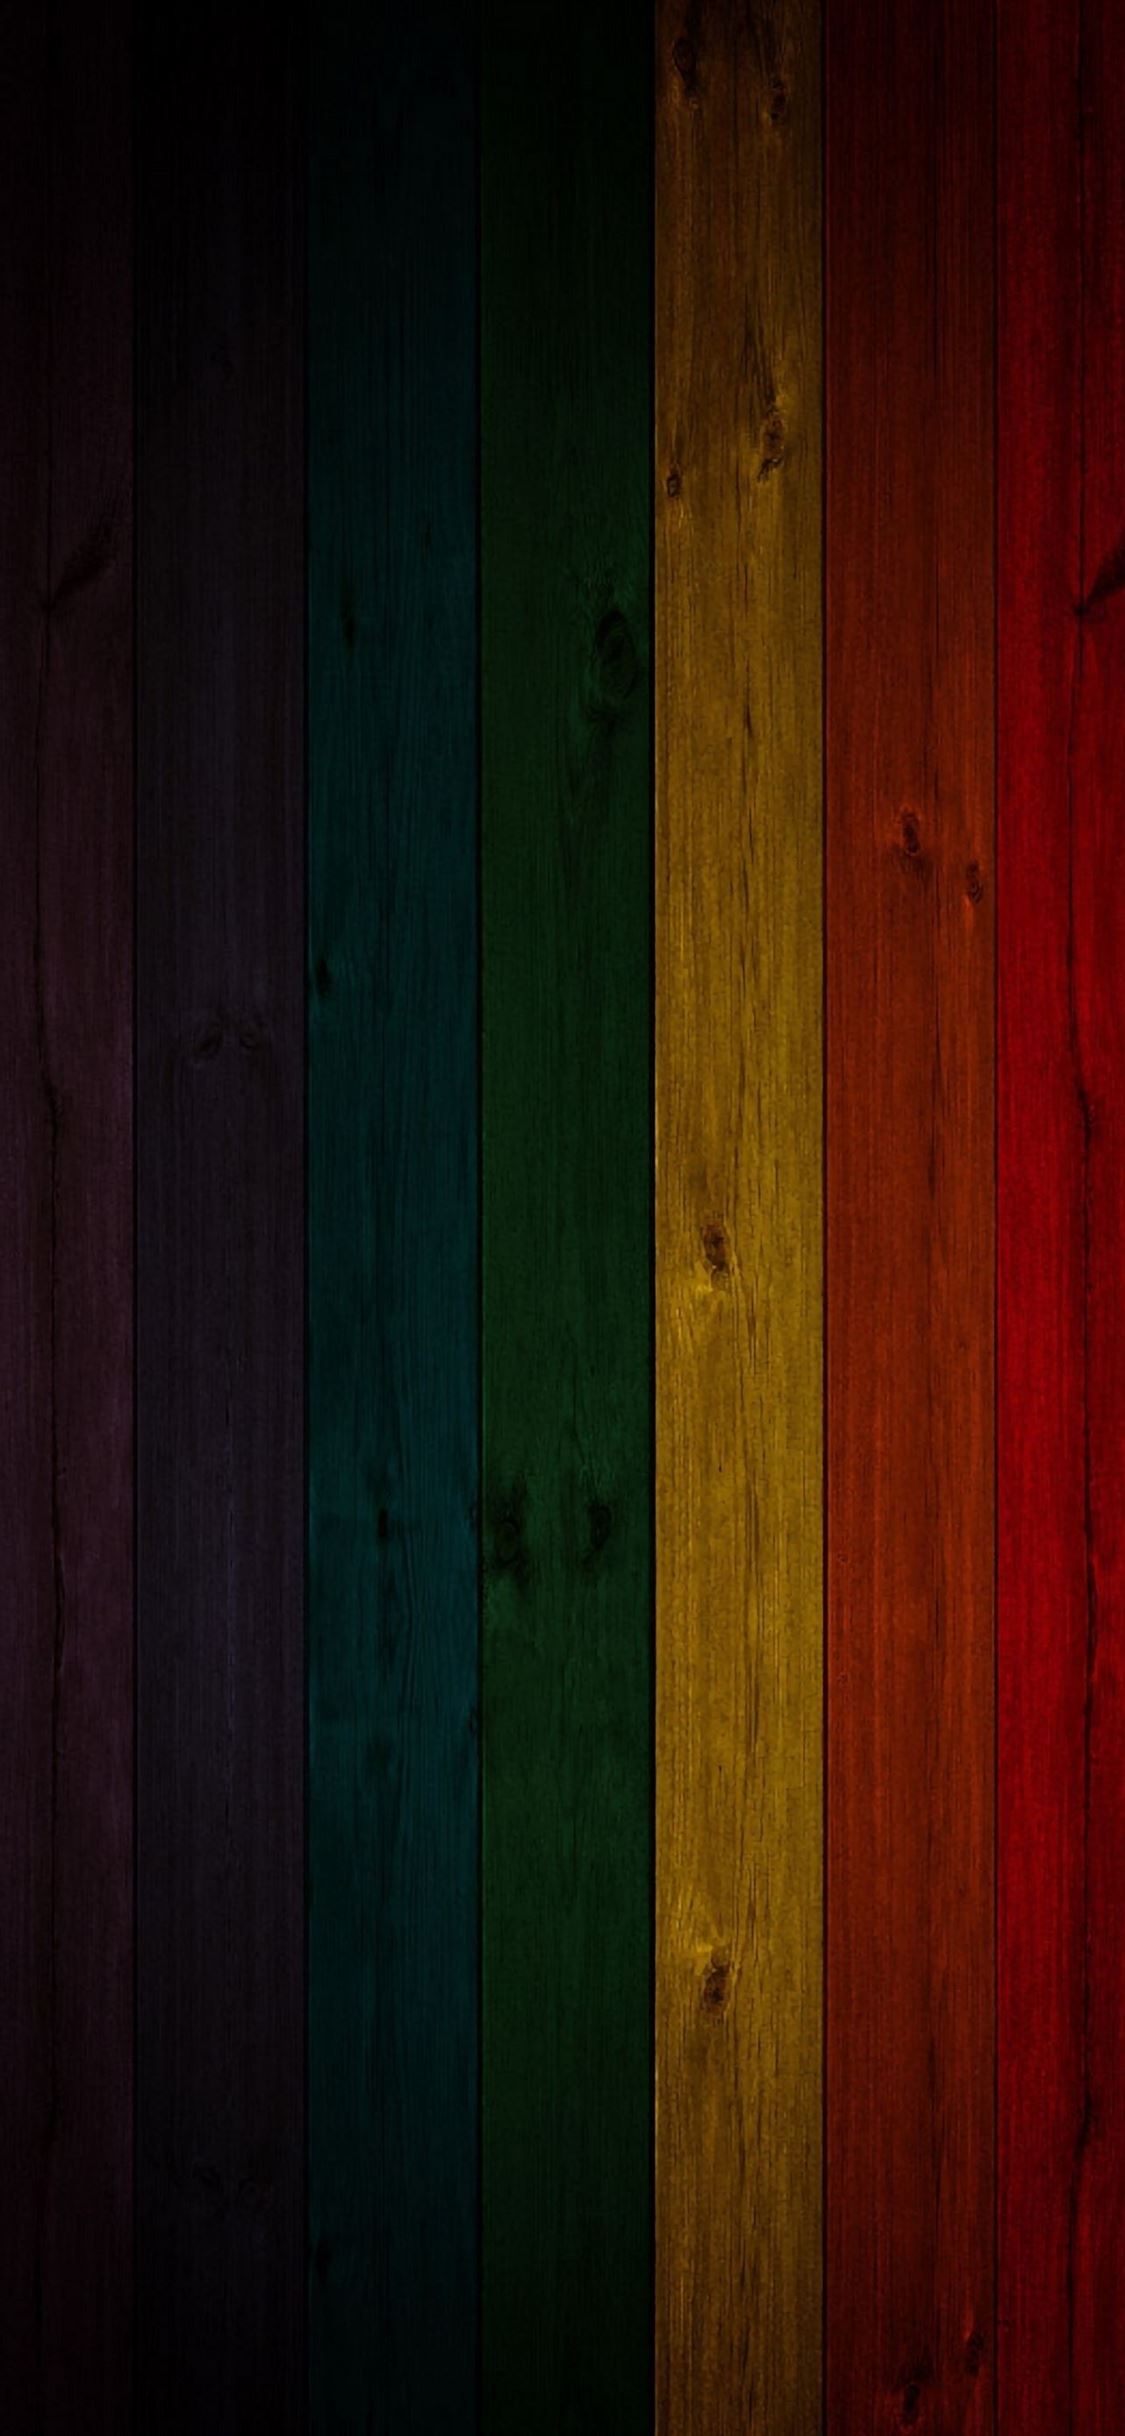 Colorful wood textures background iPhone wallpaper 